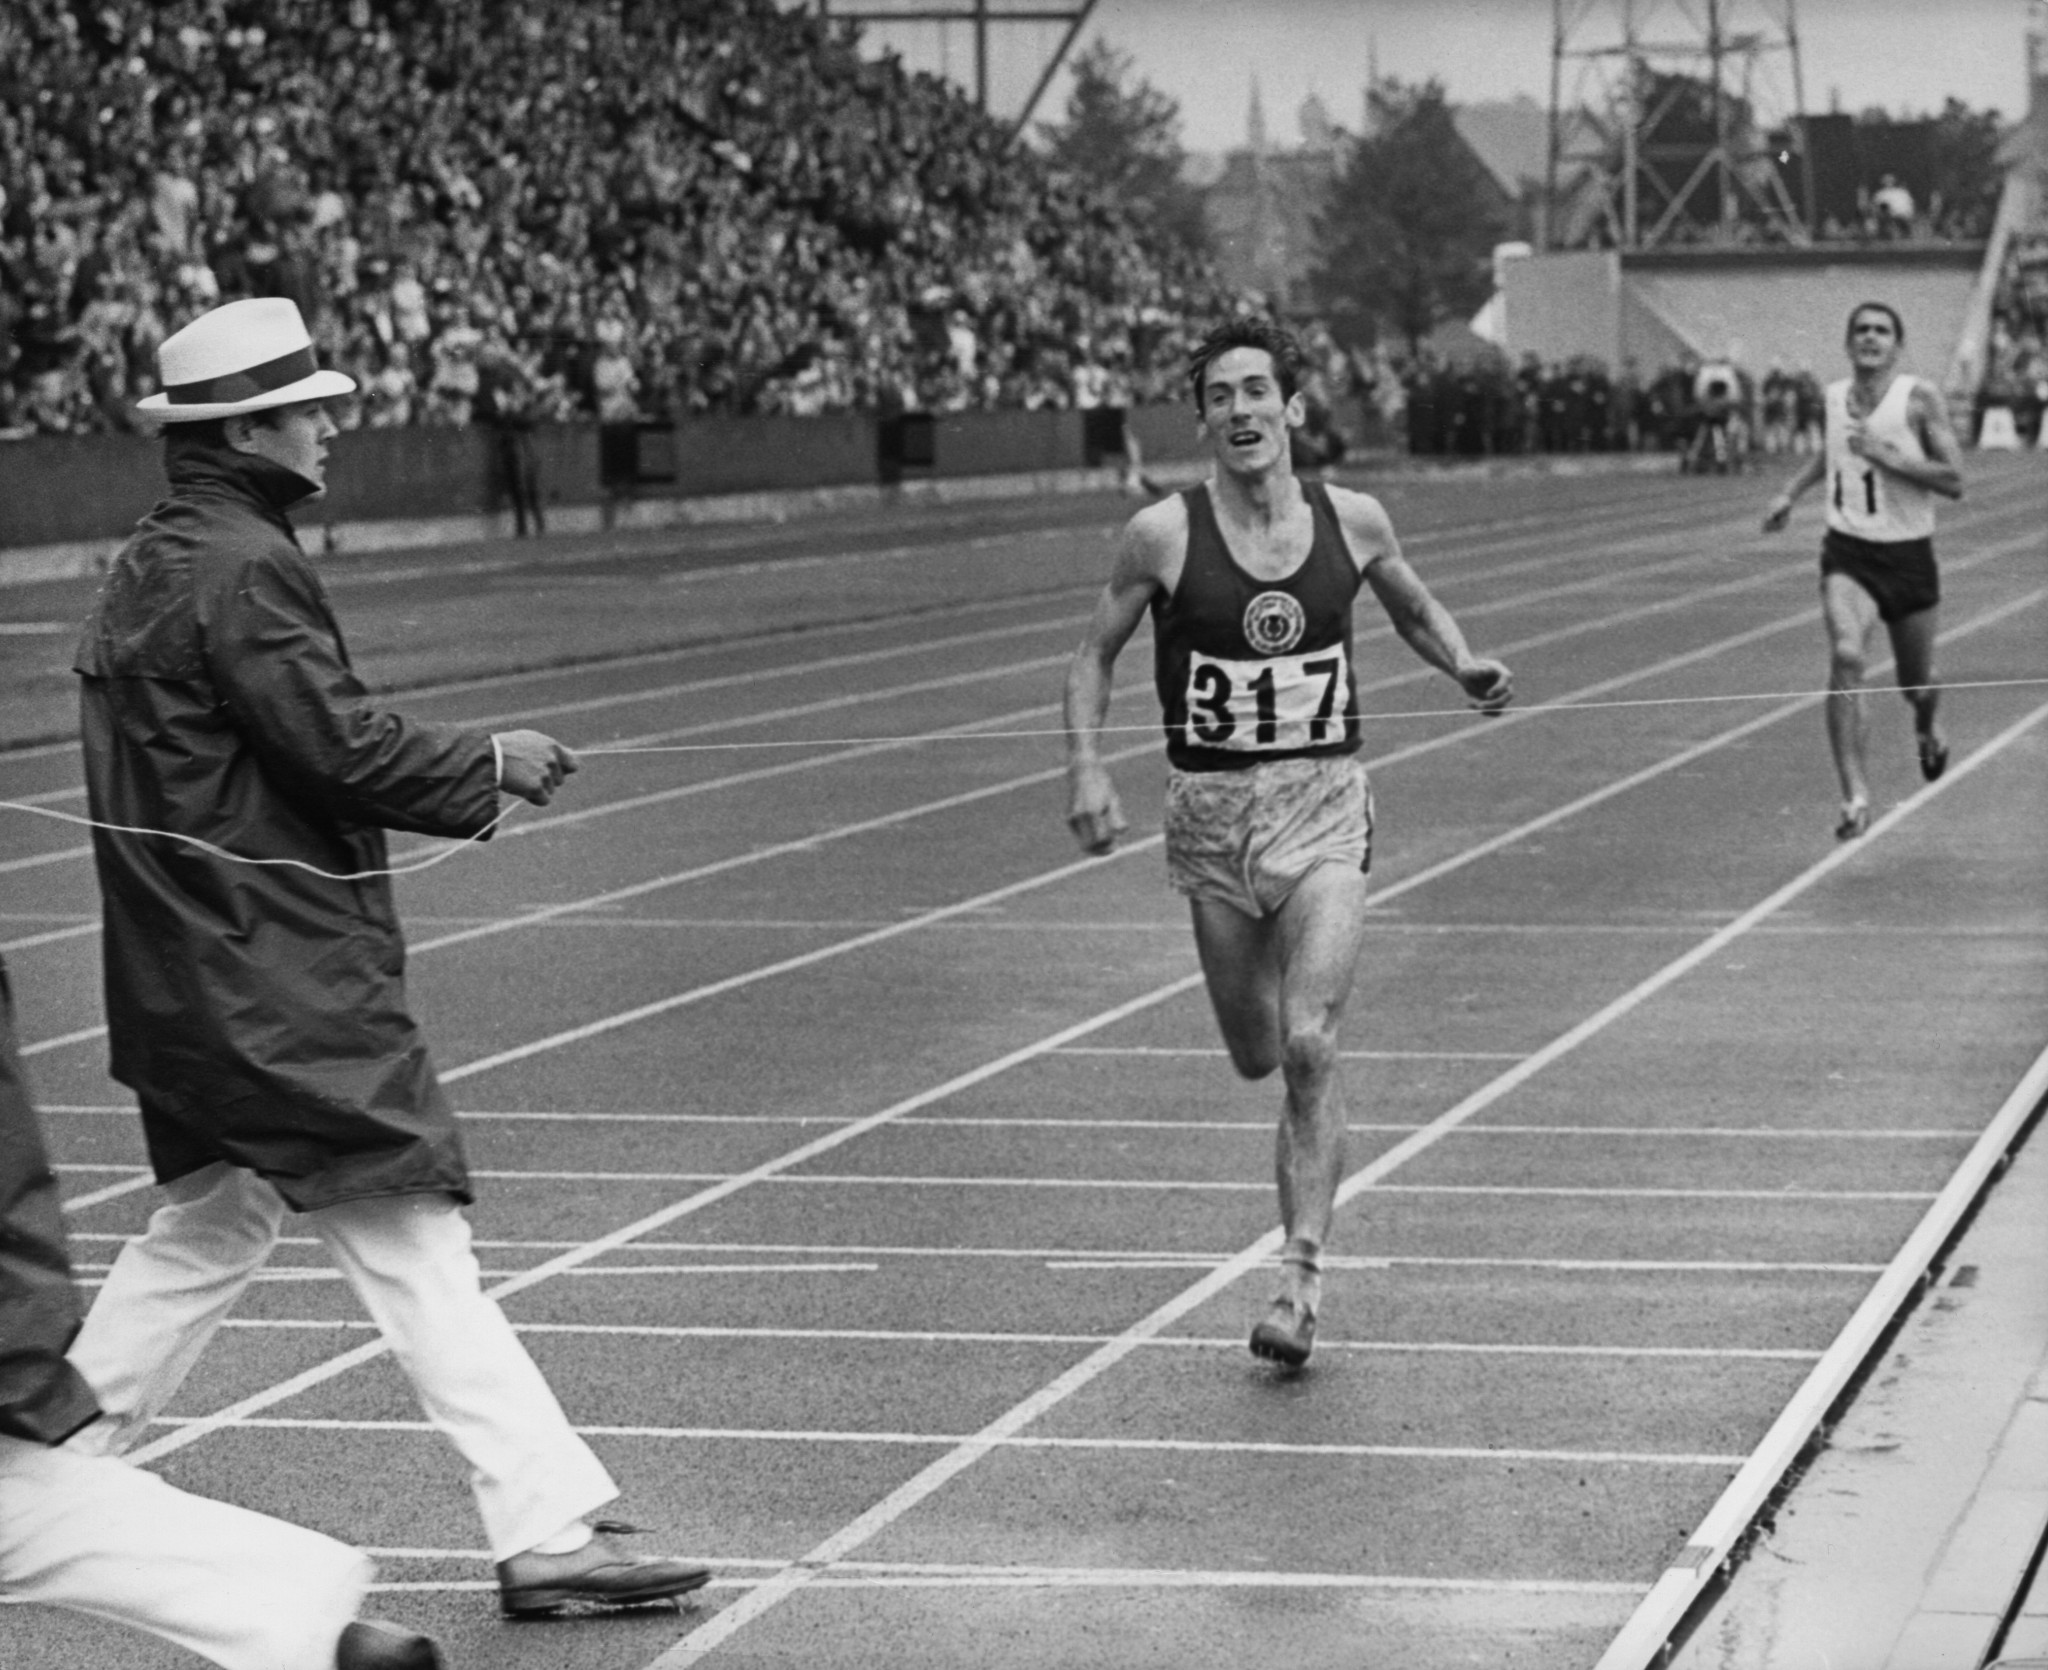 Commonwealth Games hero loses part of leg on 50th anniversary of gold medal victory